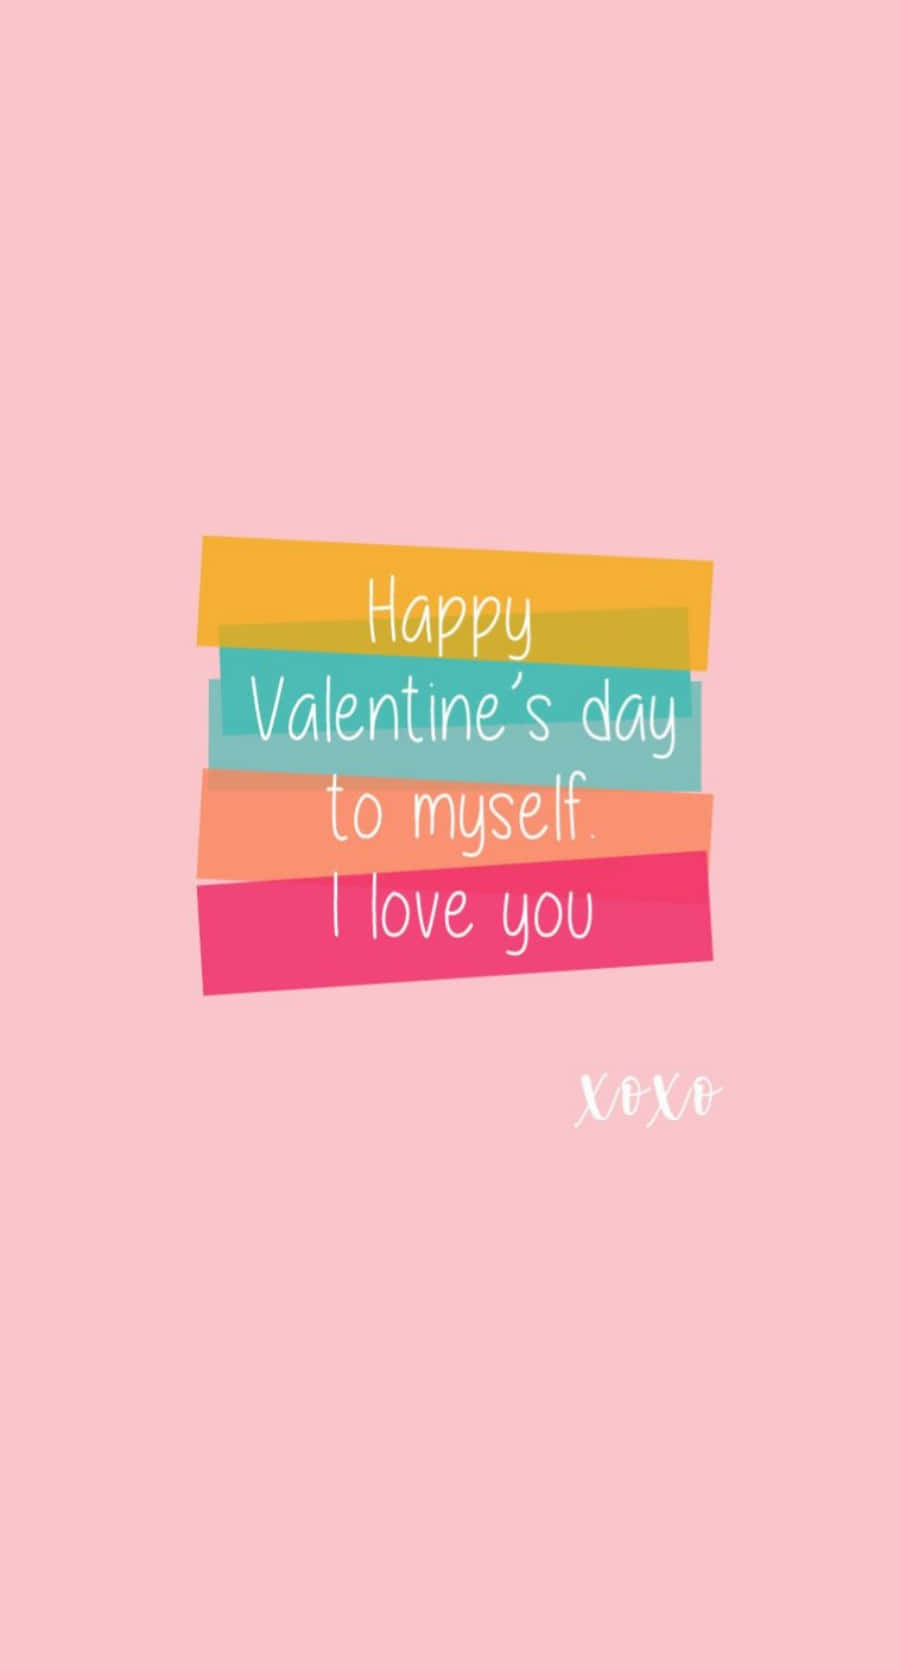 Colorful Aesthetic Valentine’s Greeting Wallpaper